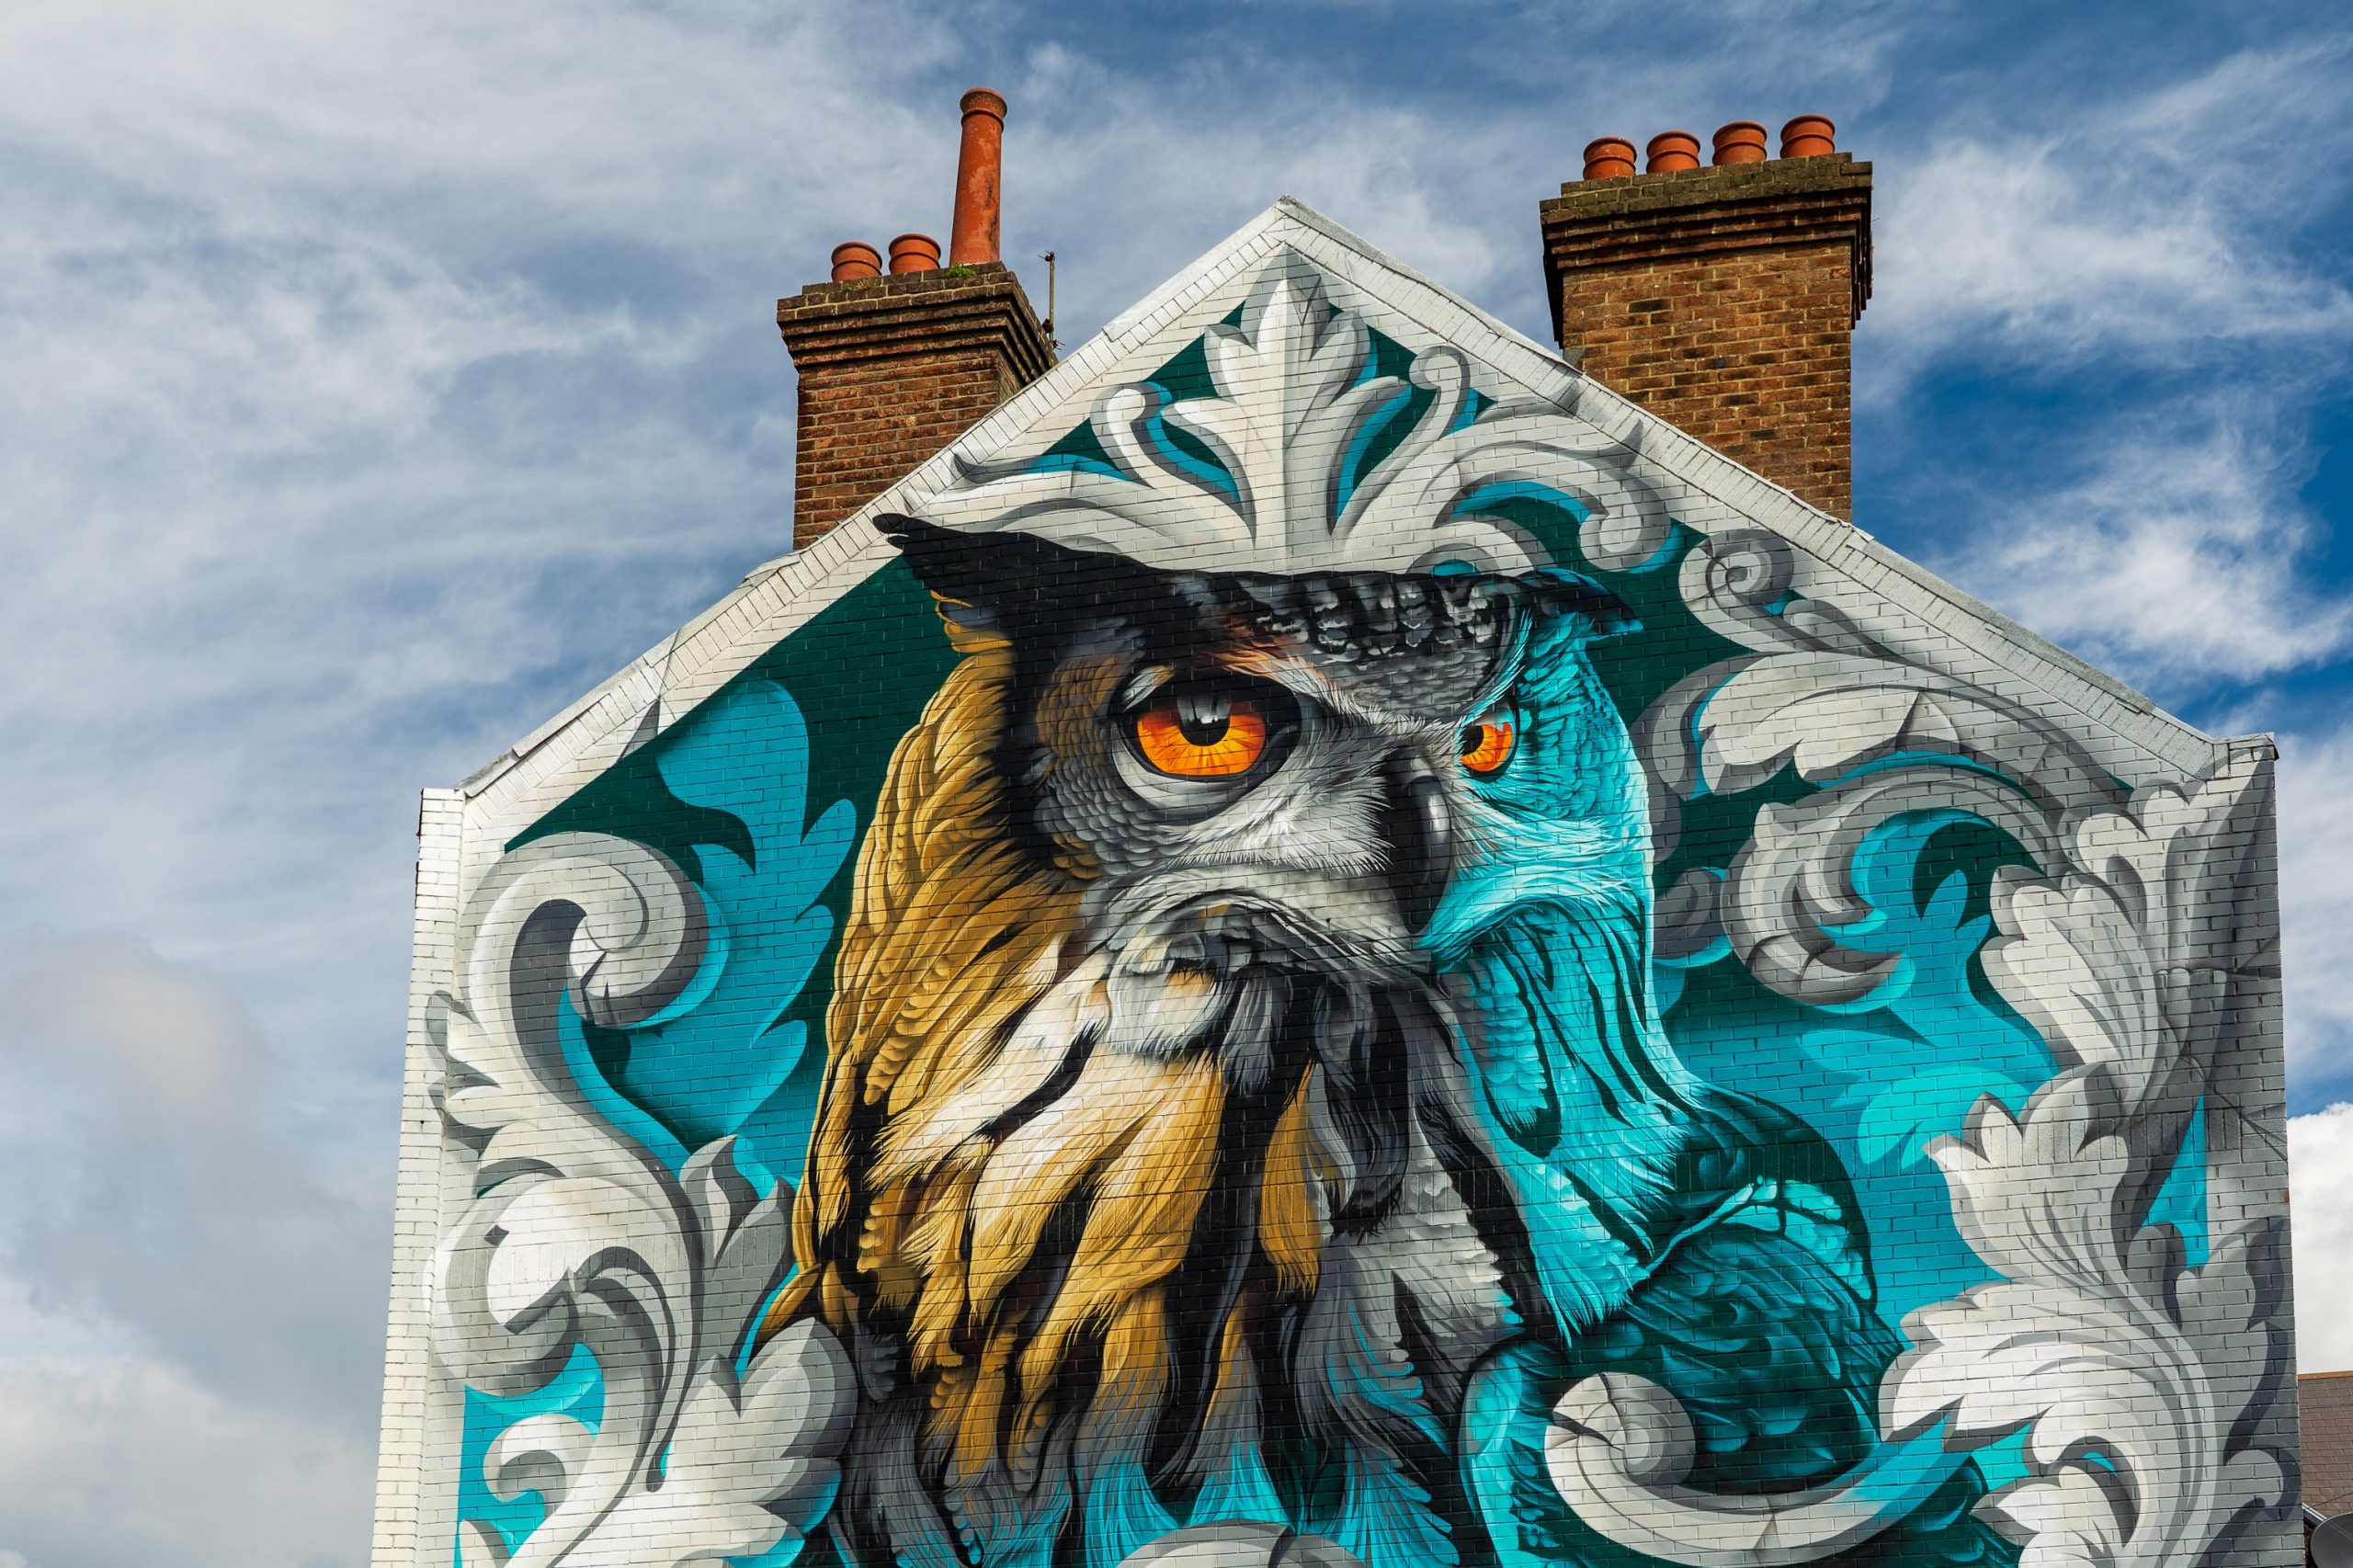 A mural of an owl with orange eyes painted on to the side of a building